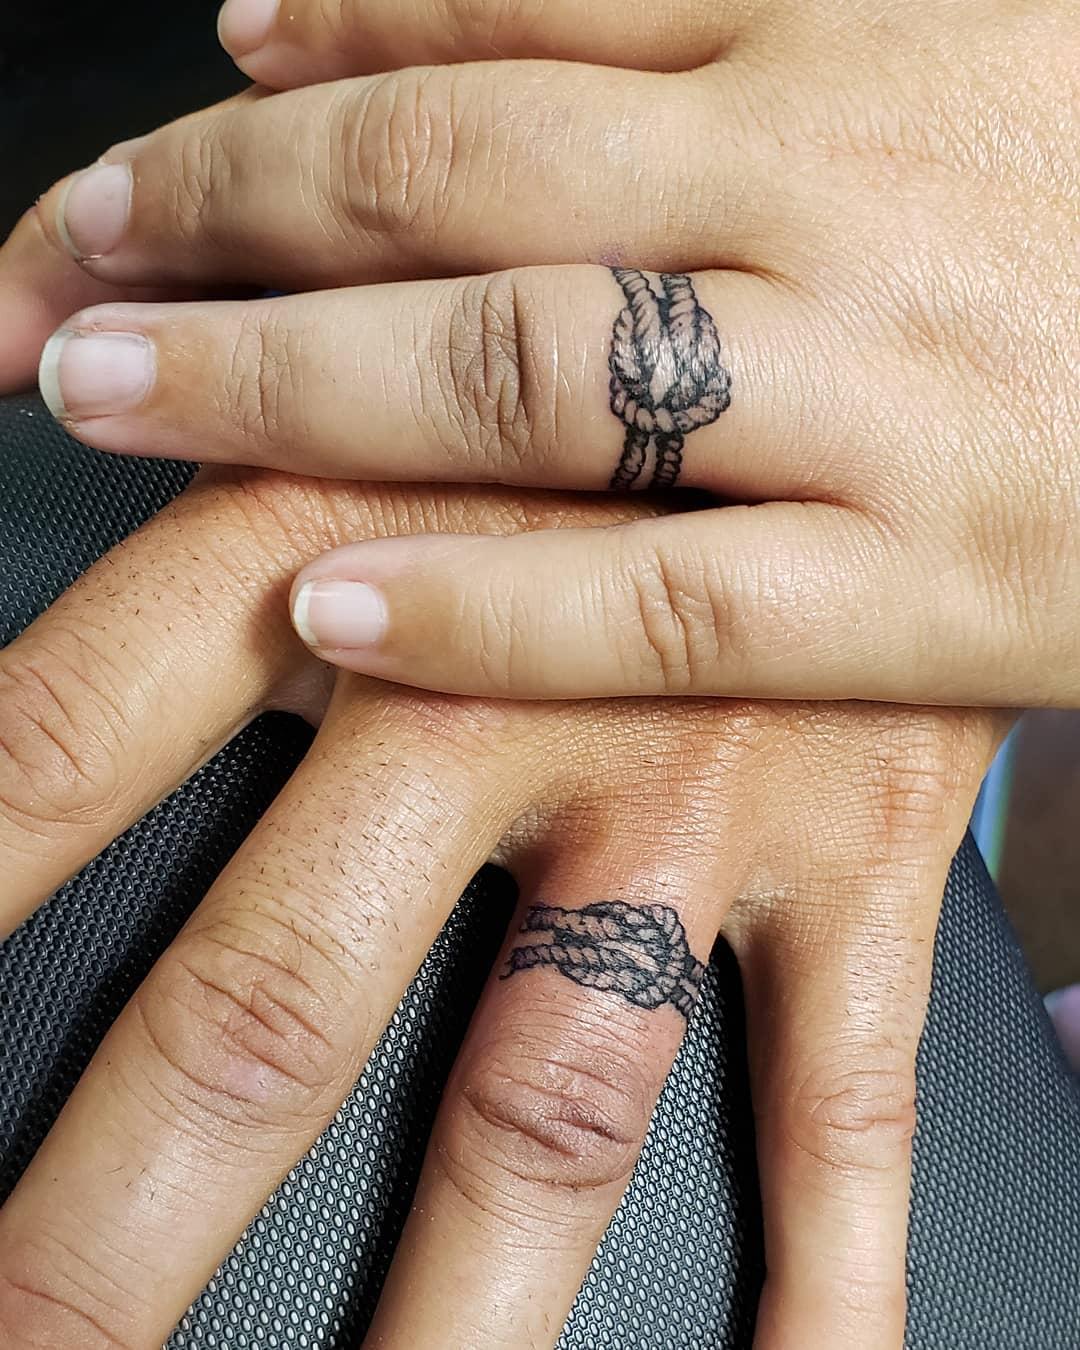 Cute Finger Tattoos Designs - Available Ideas